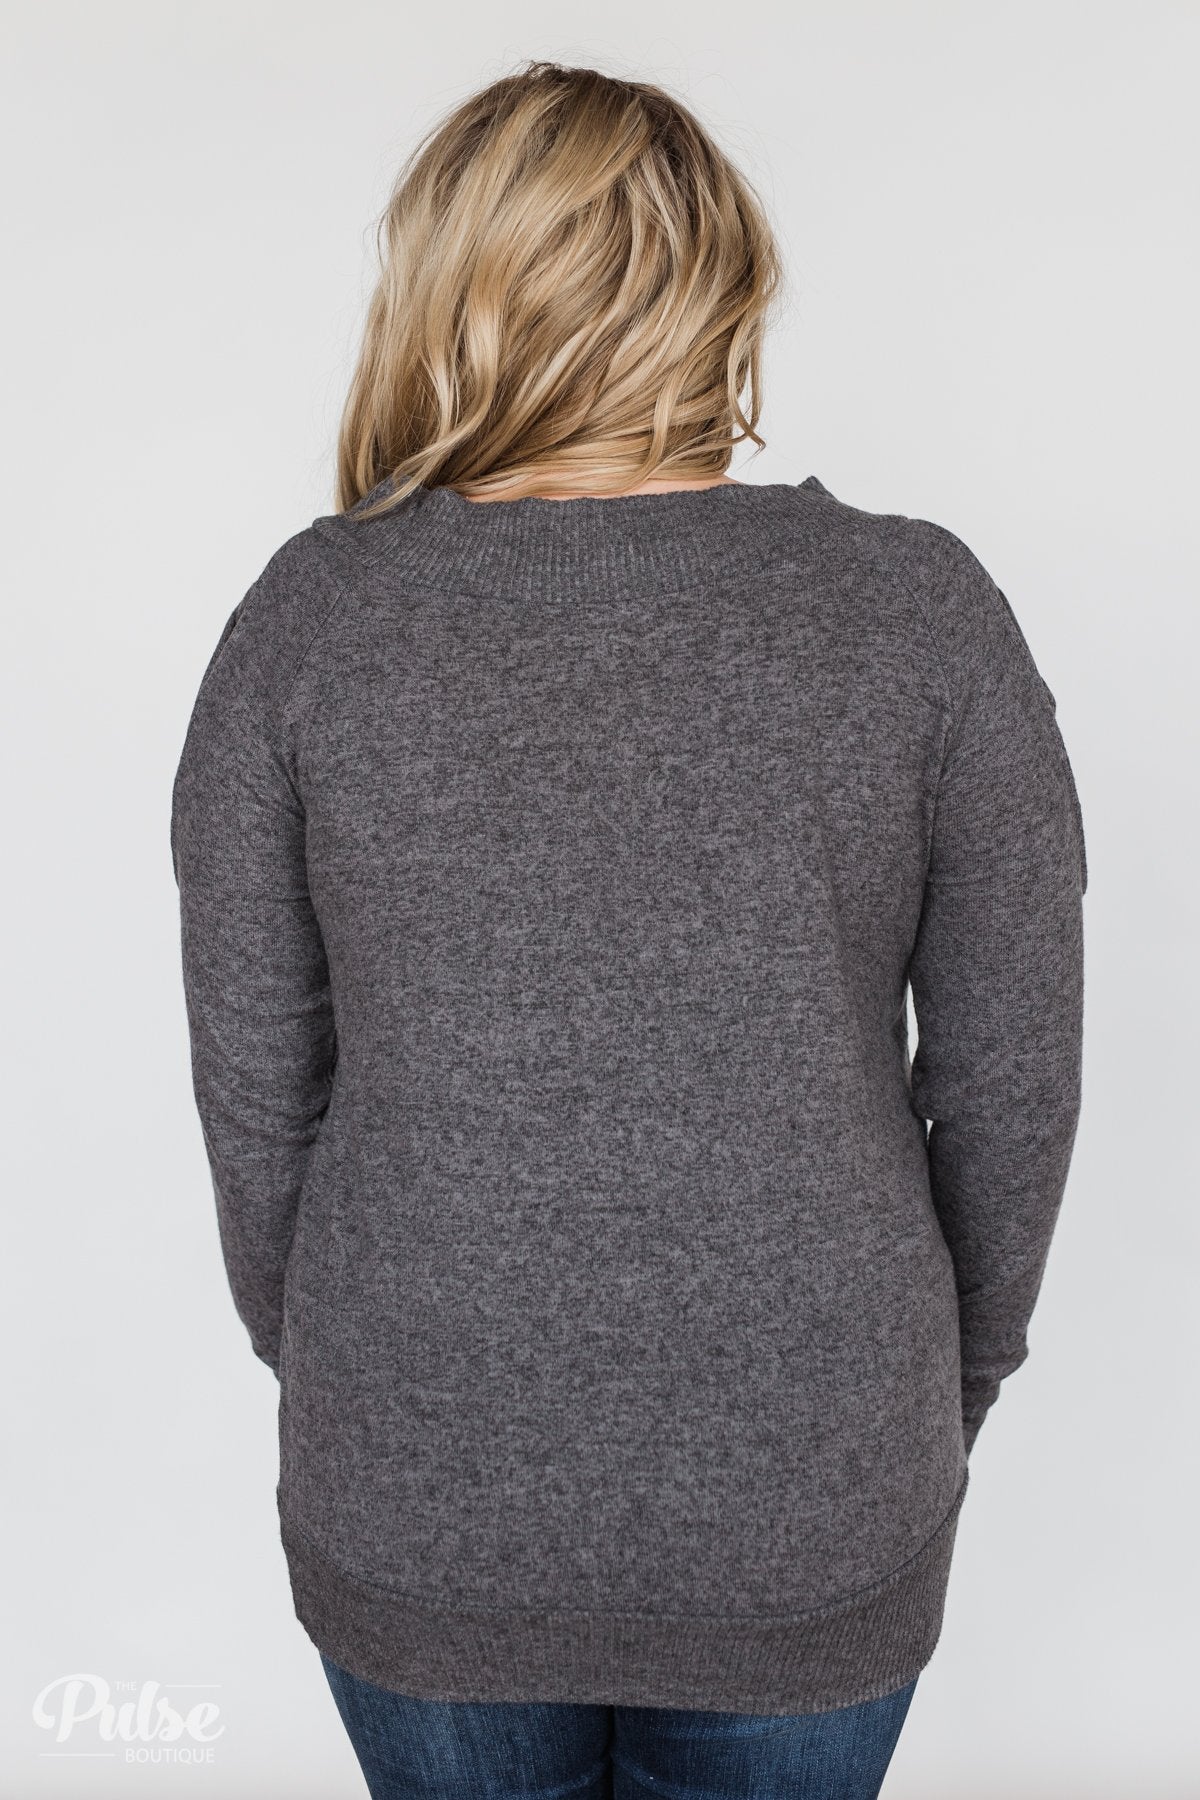 Keep Holding On Sleeve Detail Sweater- Charcoal